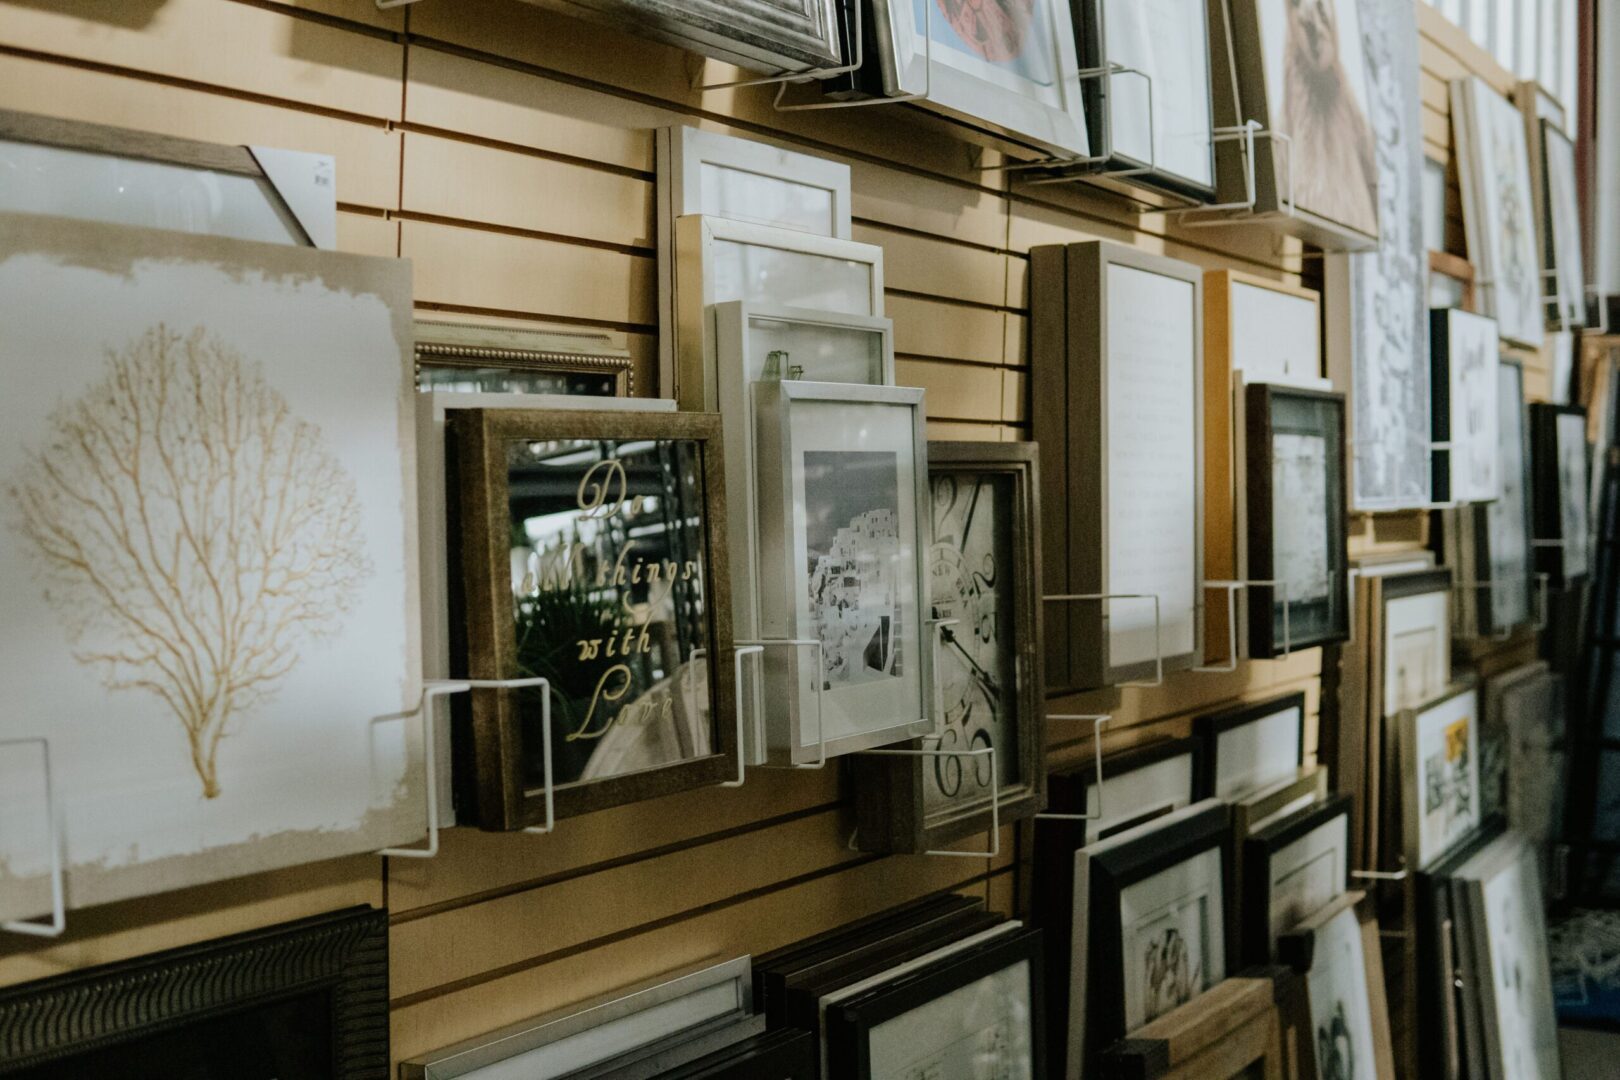 Many framed pictures on a wall in a store.